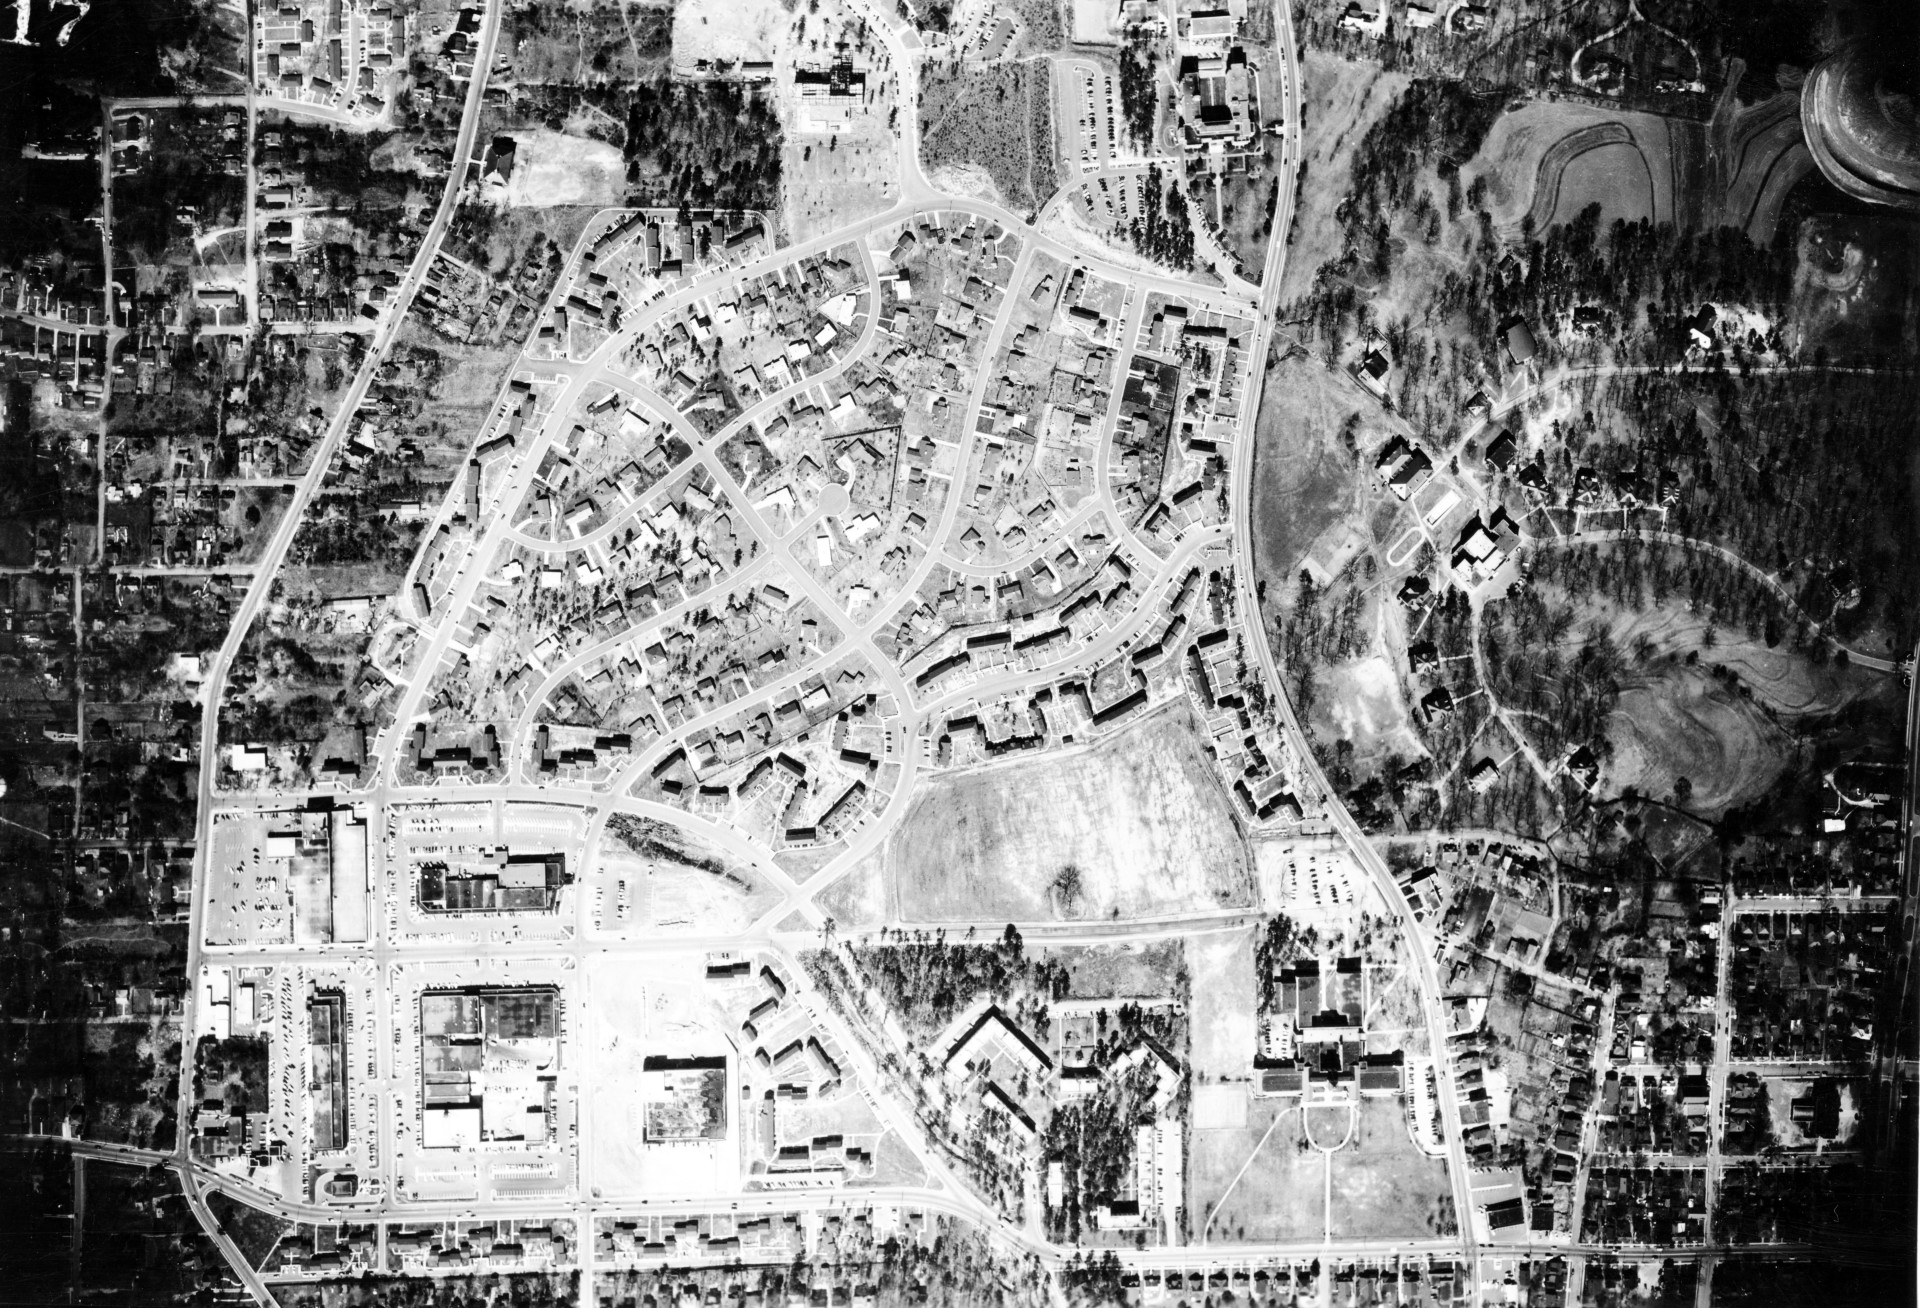 This aerial photo of Raleigh, N.C. from 1955 shows Cameron Village. Oberlin Road runs along the left side of frame, and Clarke Avenue runs along the bottom. Today, the area is booming with shops and promenades. (Credit: Conservation and Development Photog